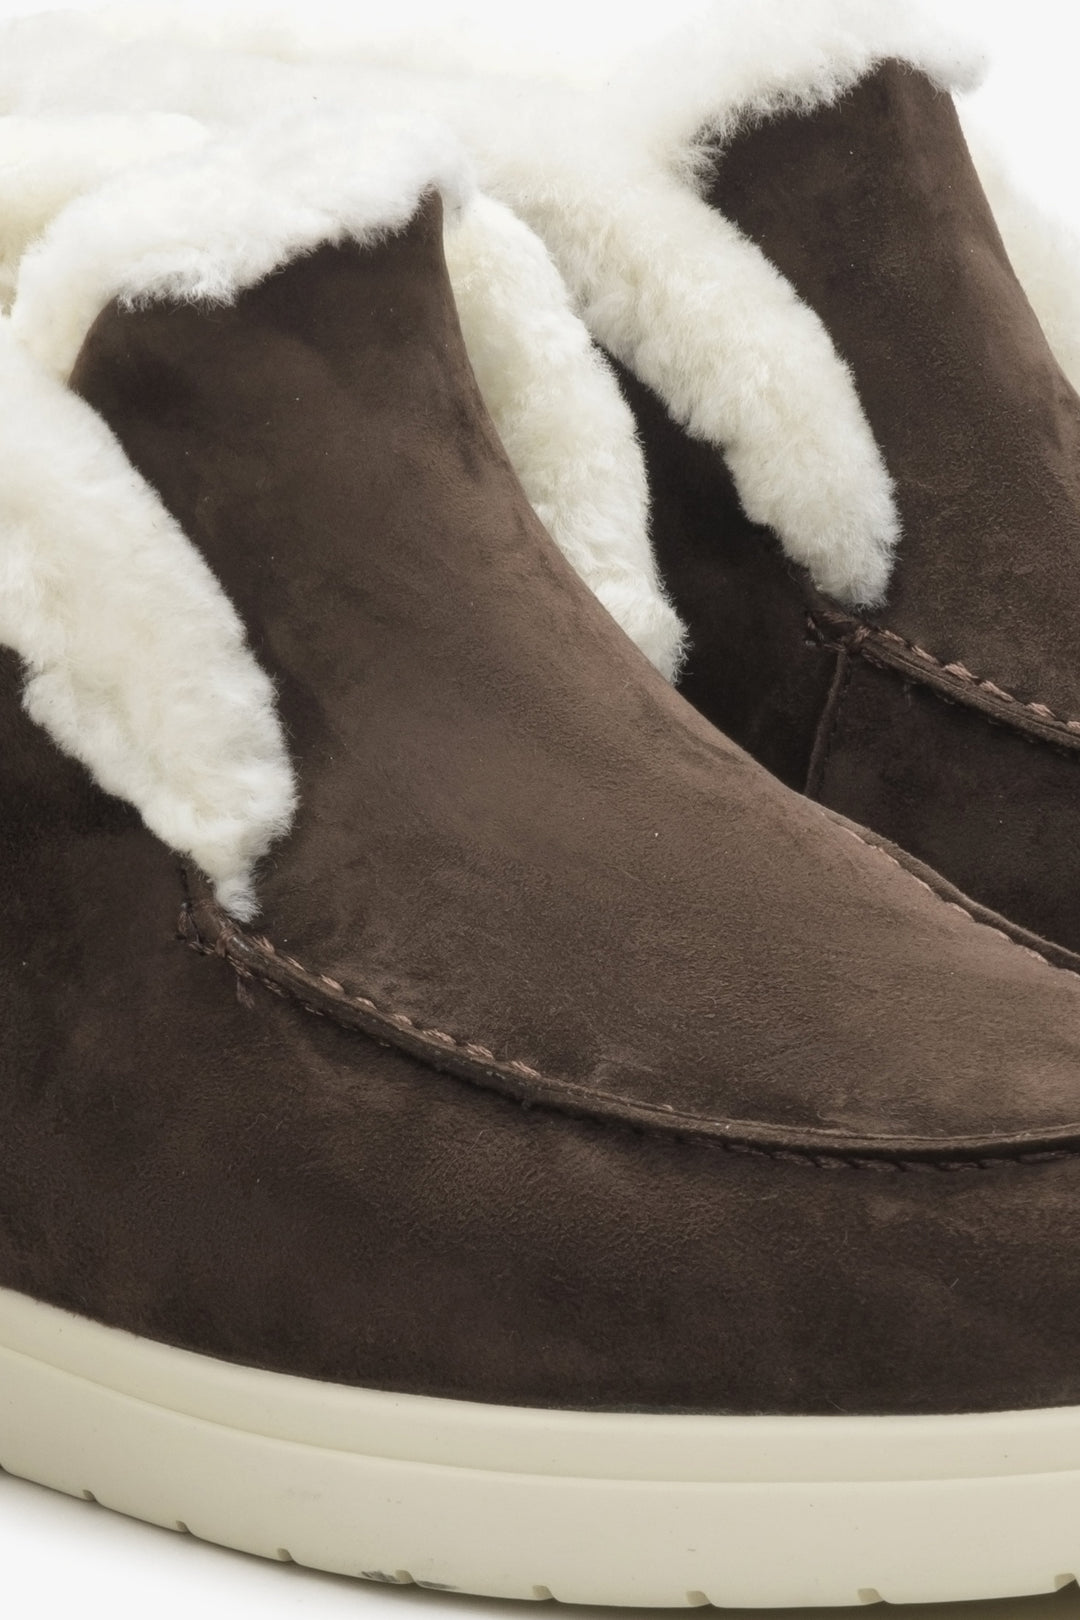 Women's fur and velour ankle boots in saddle brown colour.